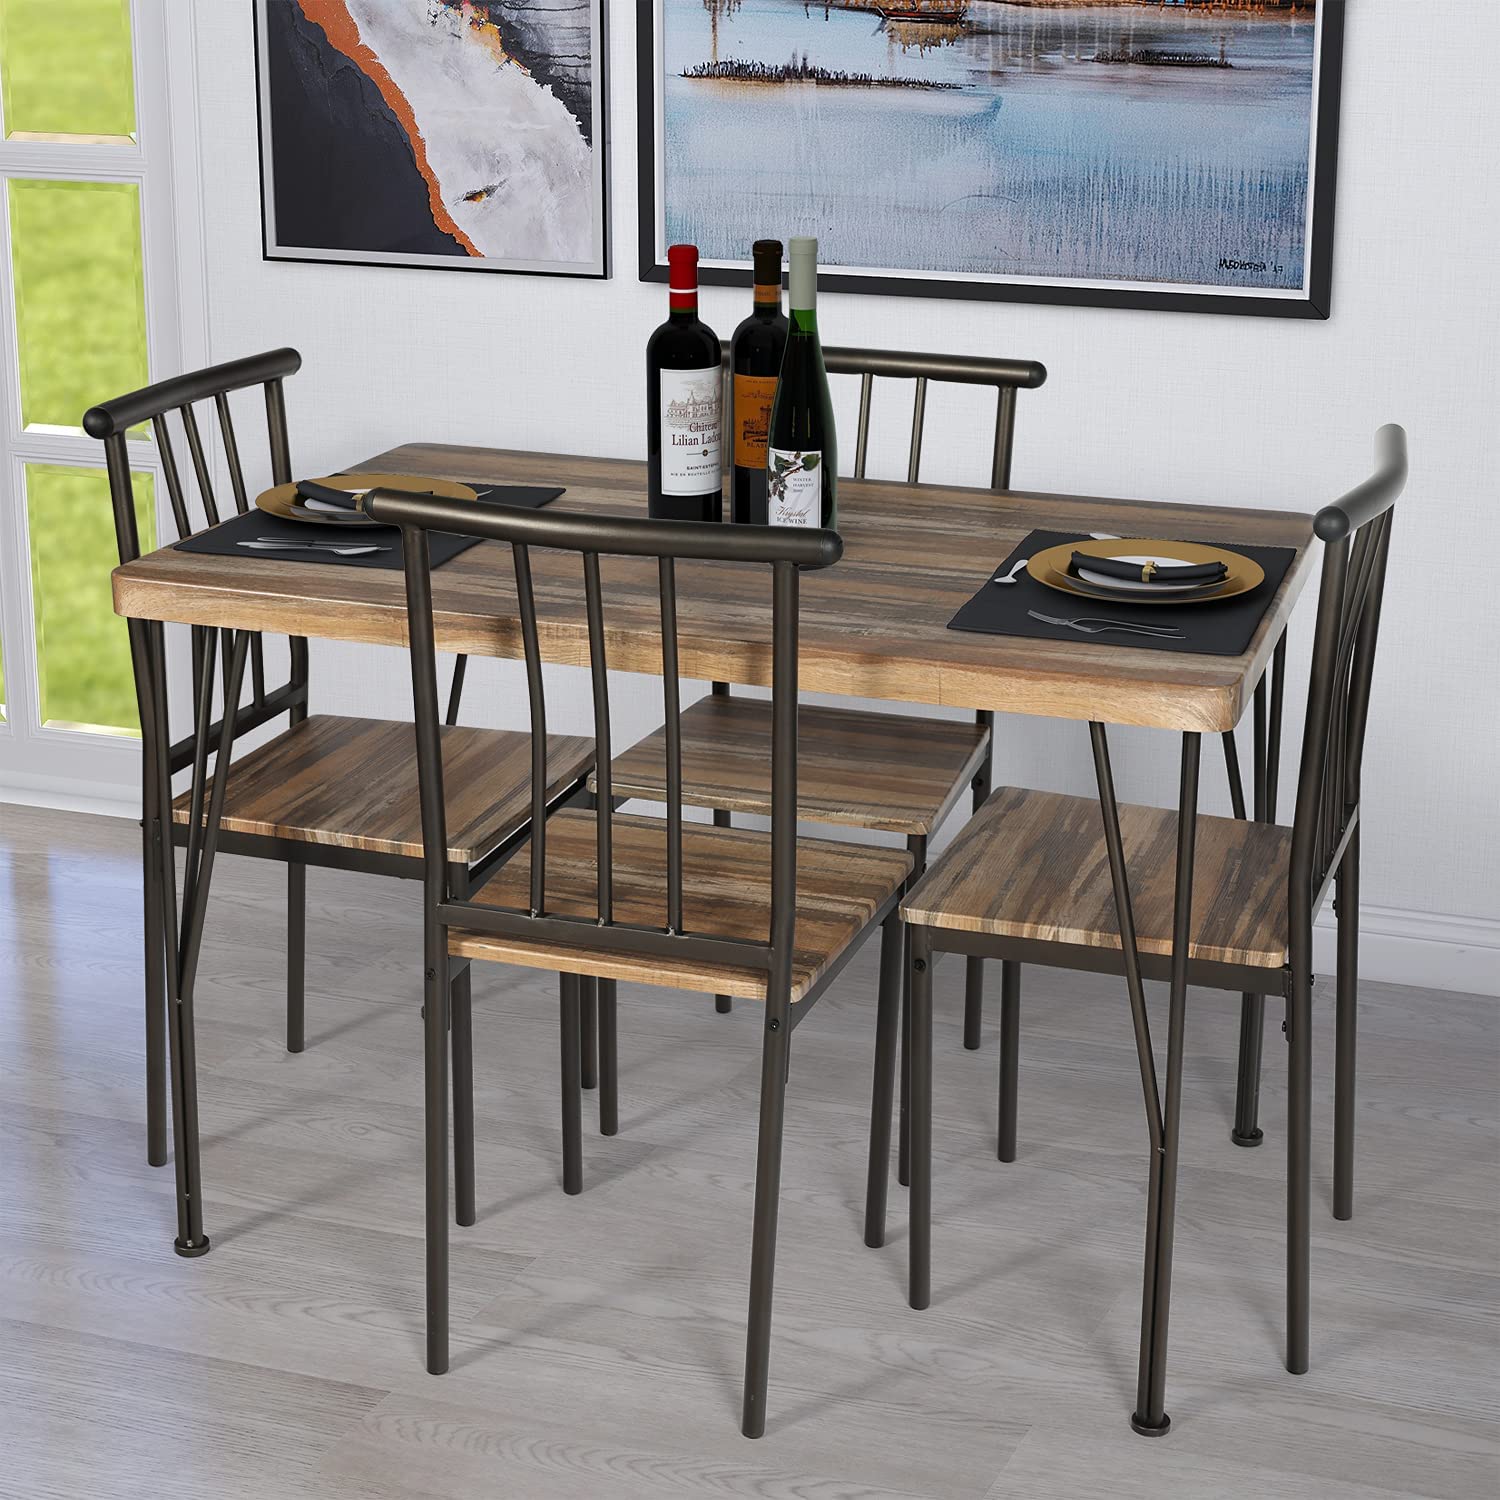 https://themarketdepot.com/wp-content/uploads/2023/01/LAZZO-5-Piece-Dining-Table-Set-Wooden-Kitchen-Table-Set-with-Metal-Frame-Rectangular-Dining-Room-Table-and-4-Chairs-Set-for-Breakfast-NookHome-Dinette-Kitchen-Studio-2.jpeg